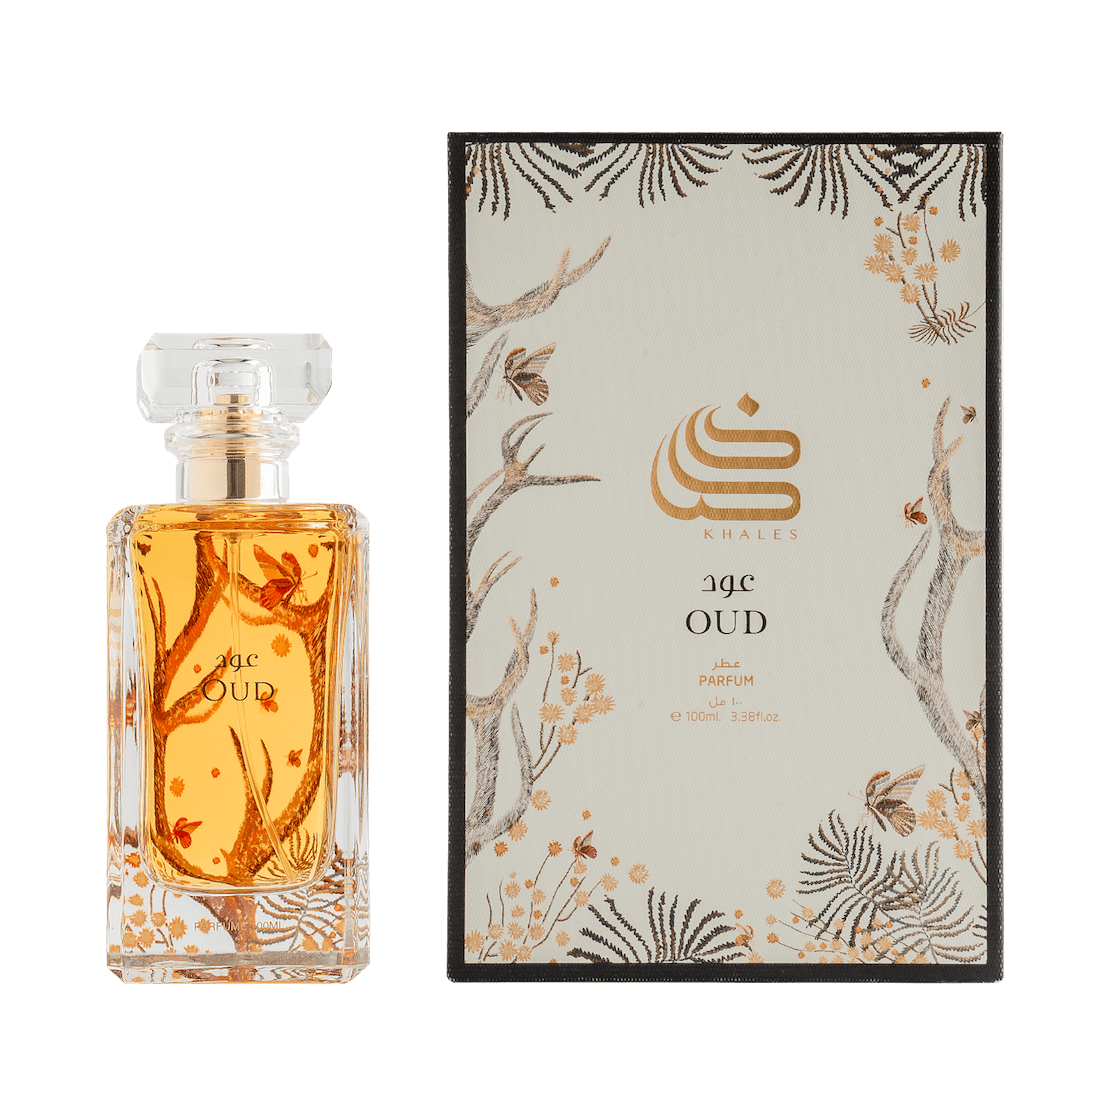 Oud (100ml) - Khales - MHGboutique - perfumes - fragrances - oud - online shopping - free shipping - top perfumes - best perfumes